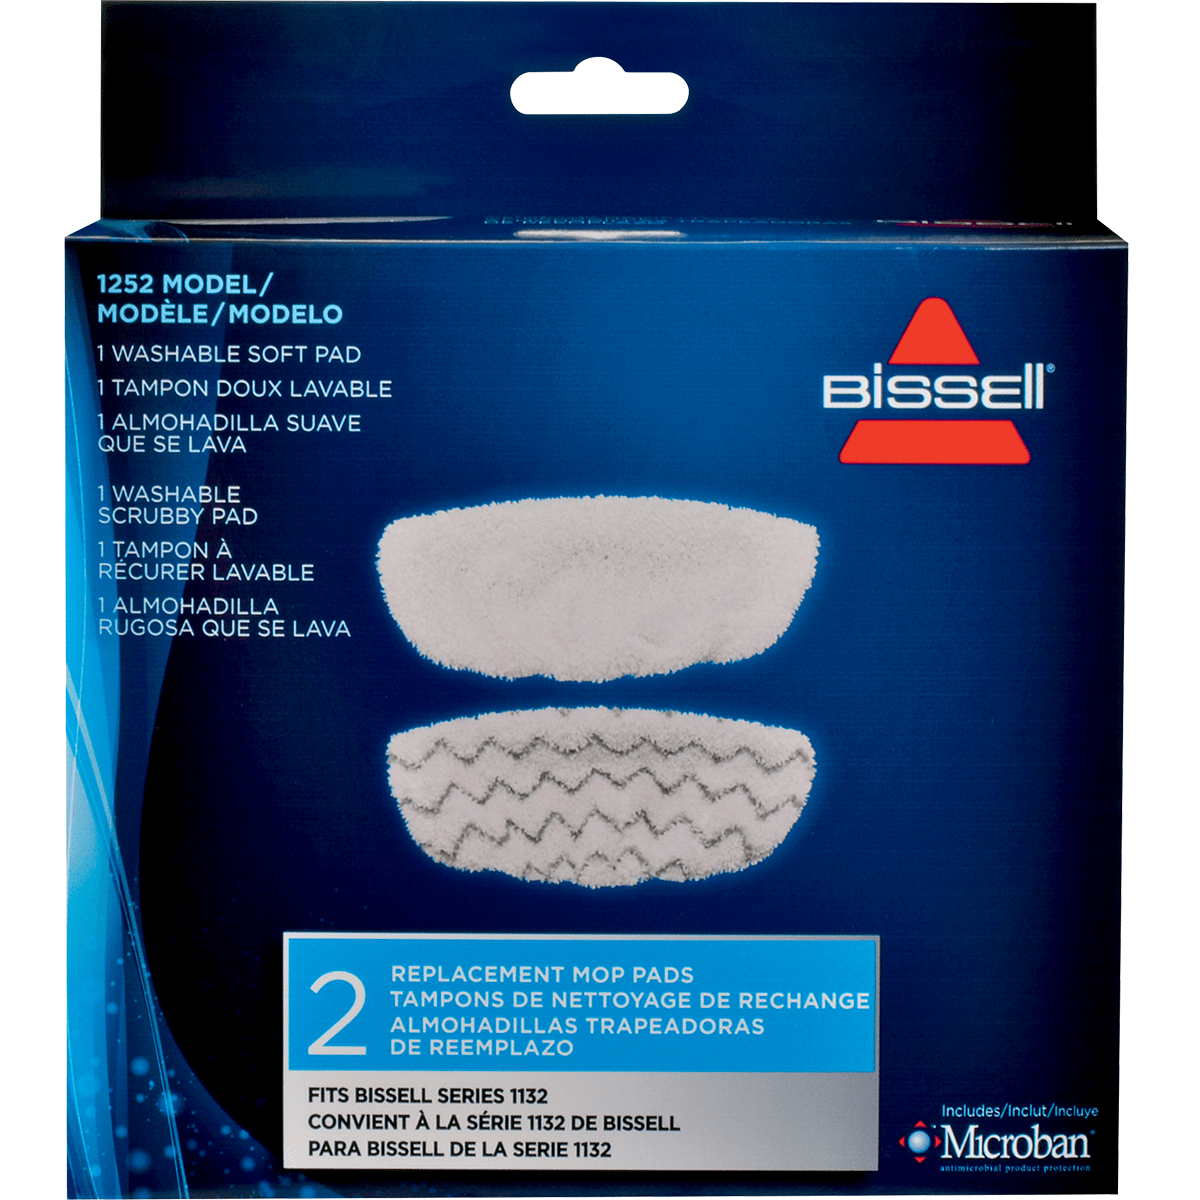 Bissell Microfiber Steam Mop Pad Kit For Symphony Mops - 2 Pack (#1252)